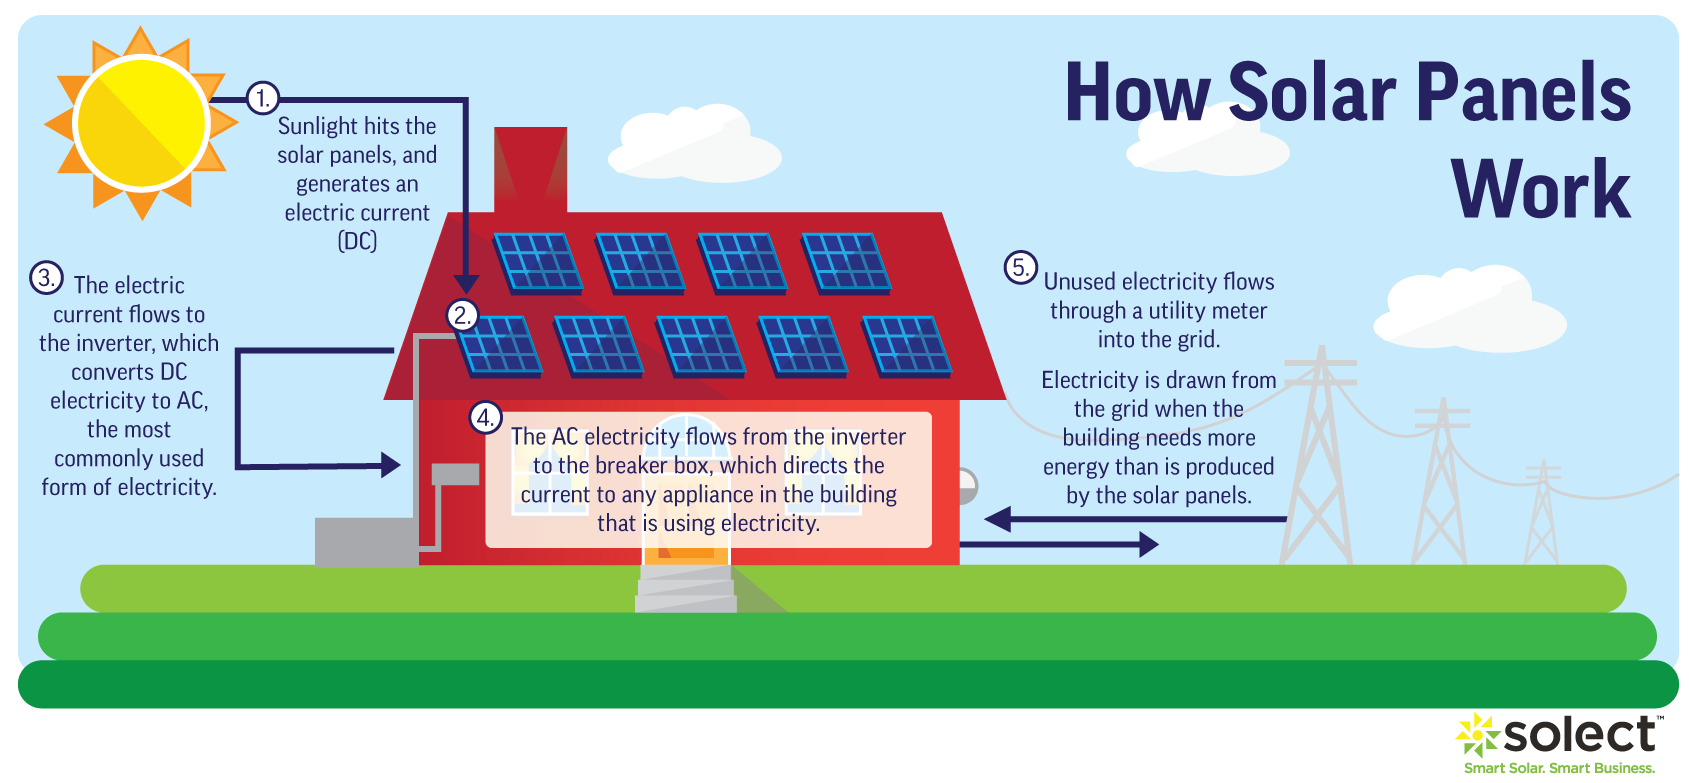 How do Solar Panels Work? The Science of Solar Explained. - Solect ...